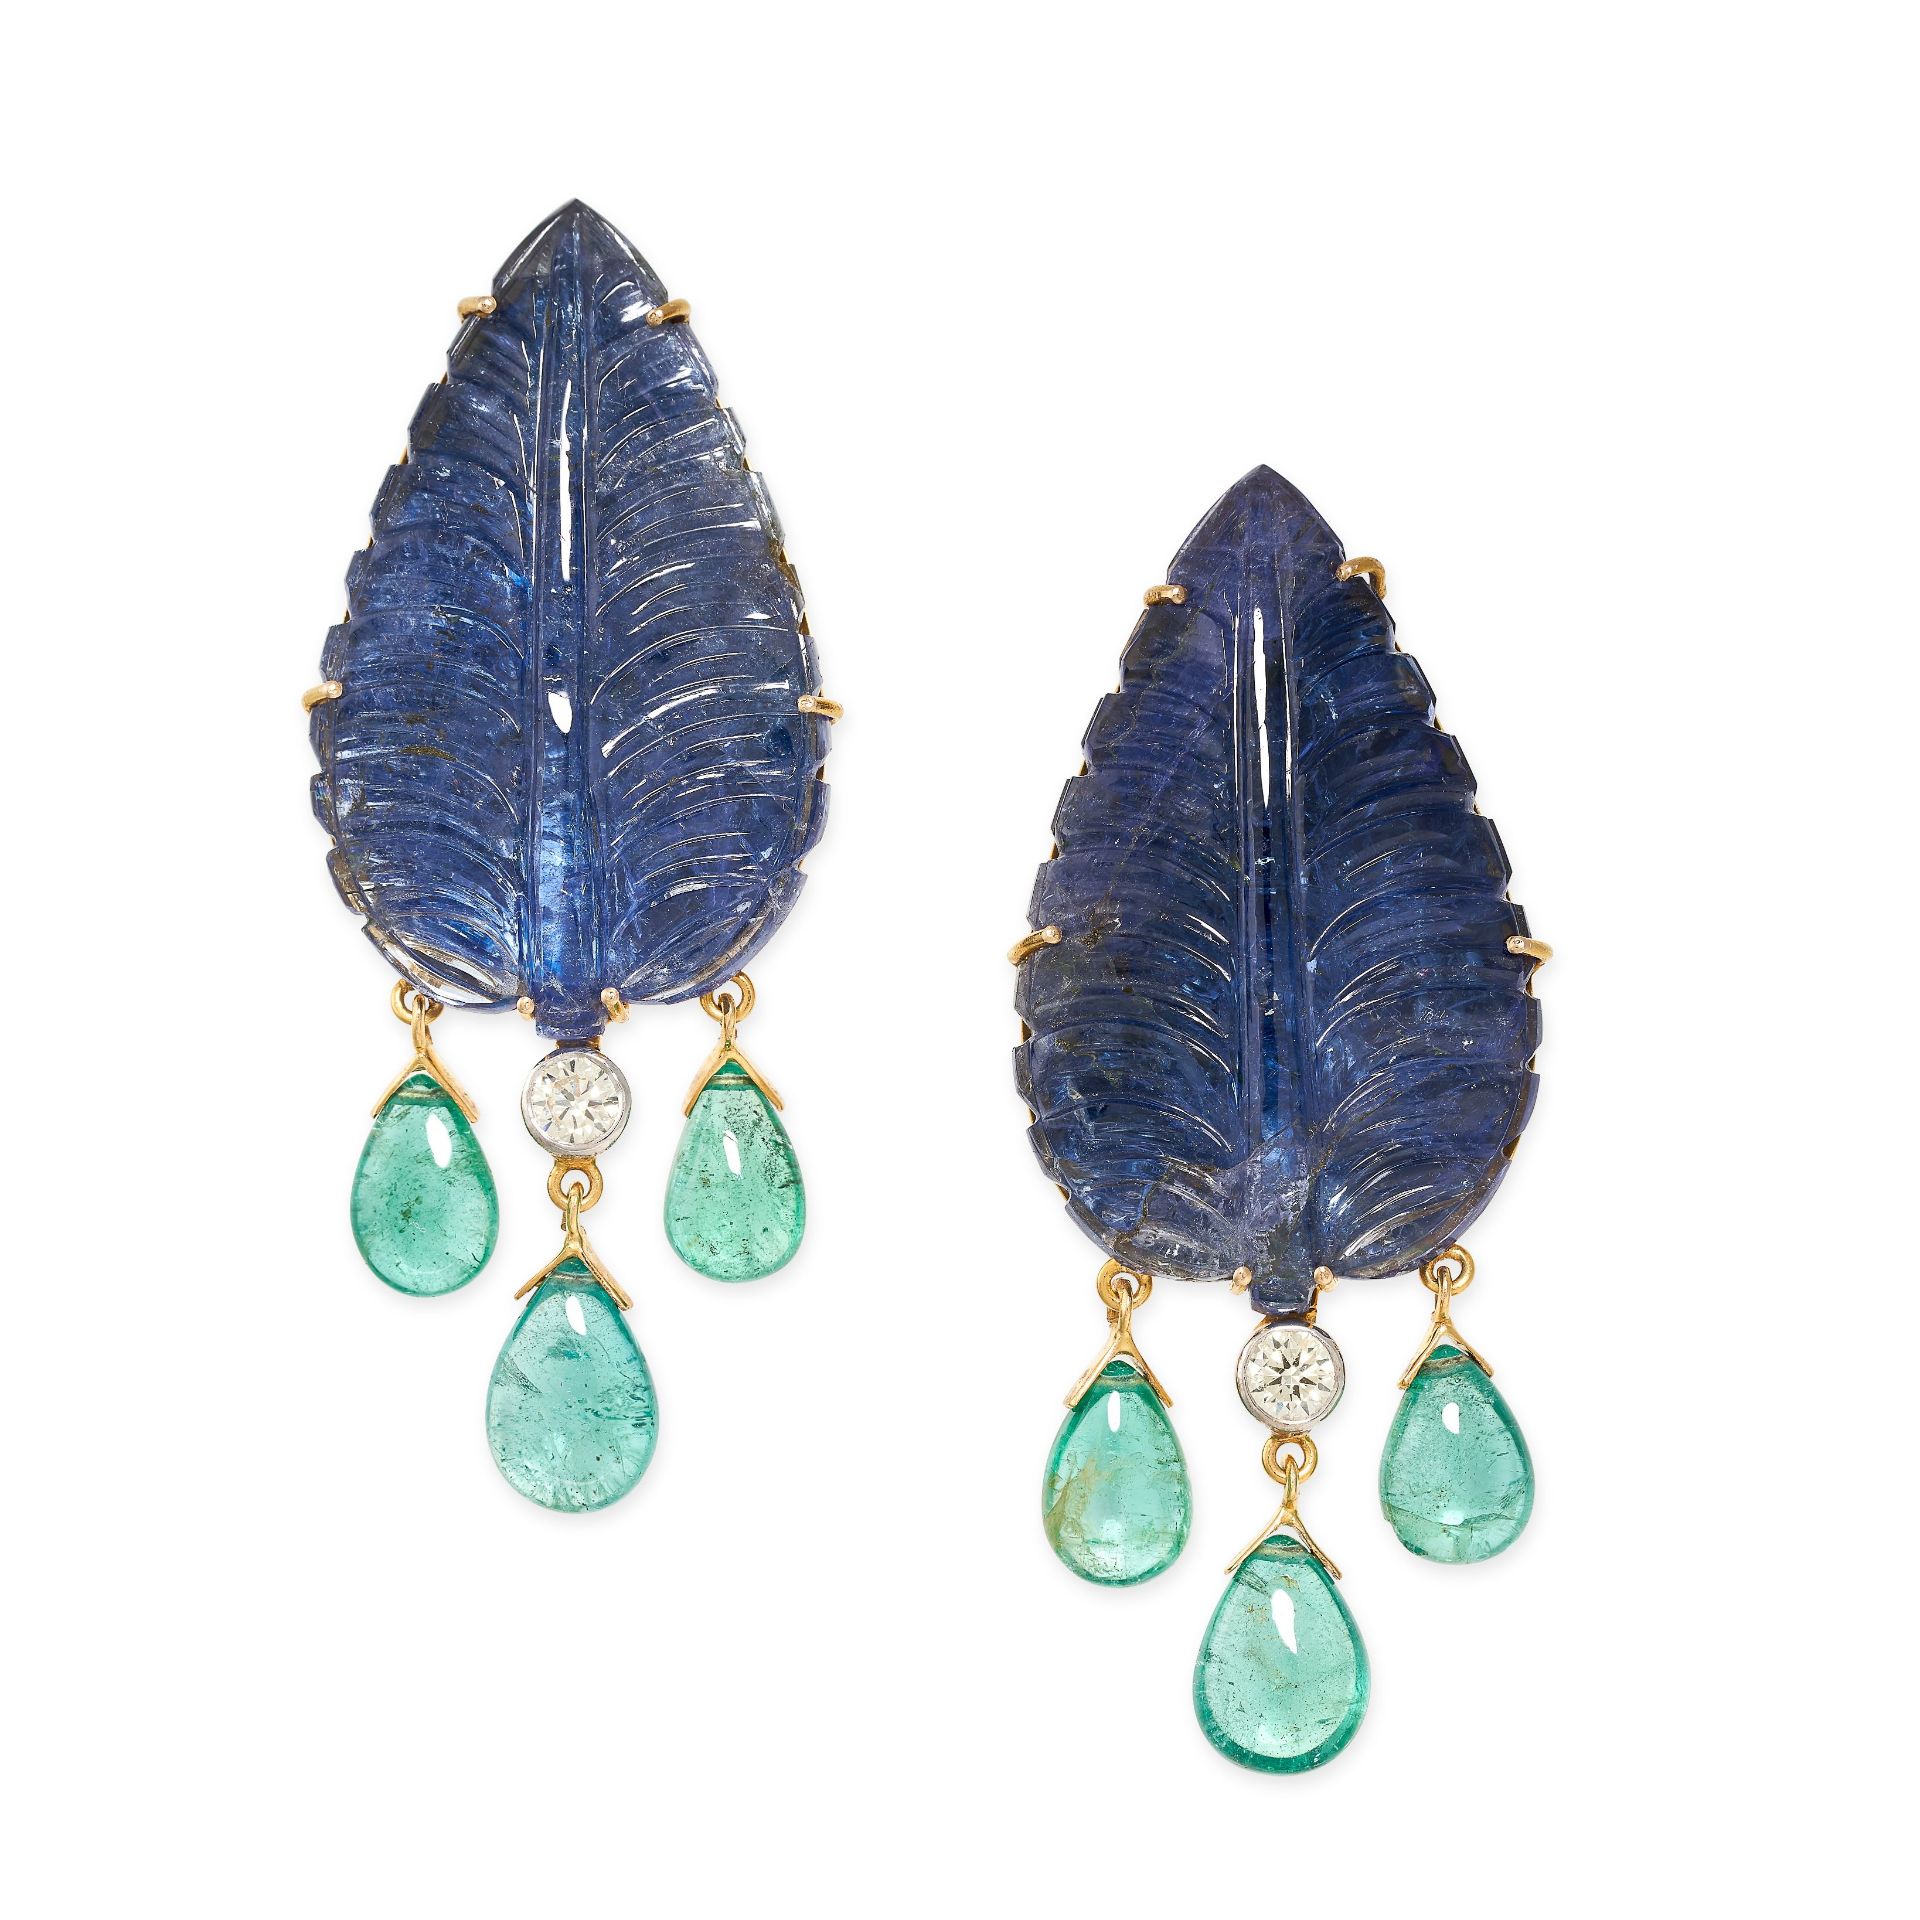 A PAIR OF TANZANITE, DIAMOND AND EMERALD EARRINGS in 18ct yellow gold, each set with a carved